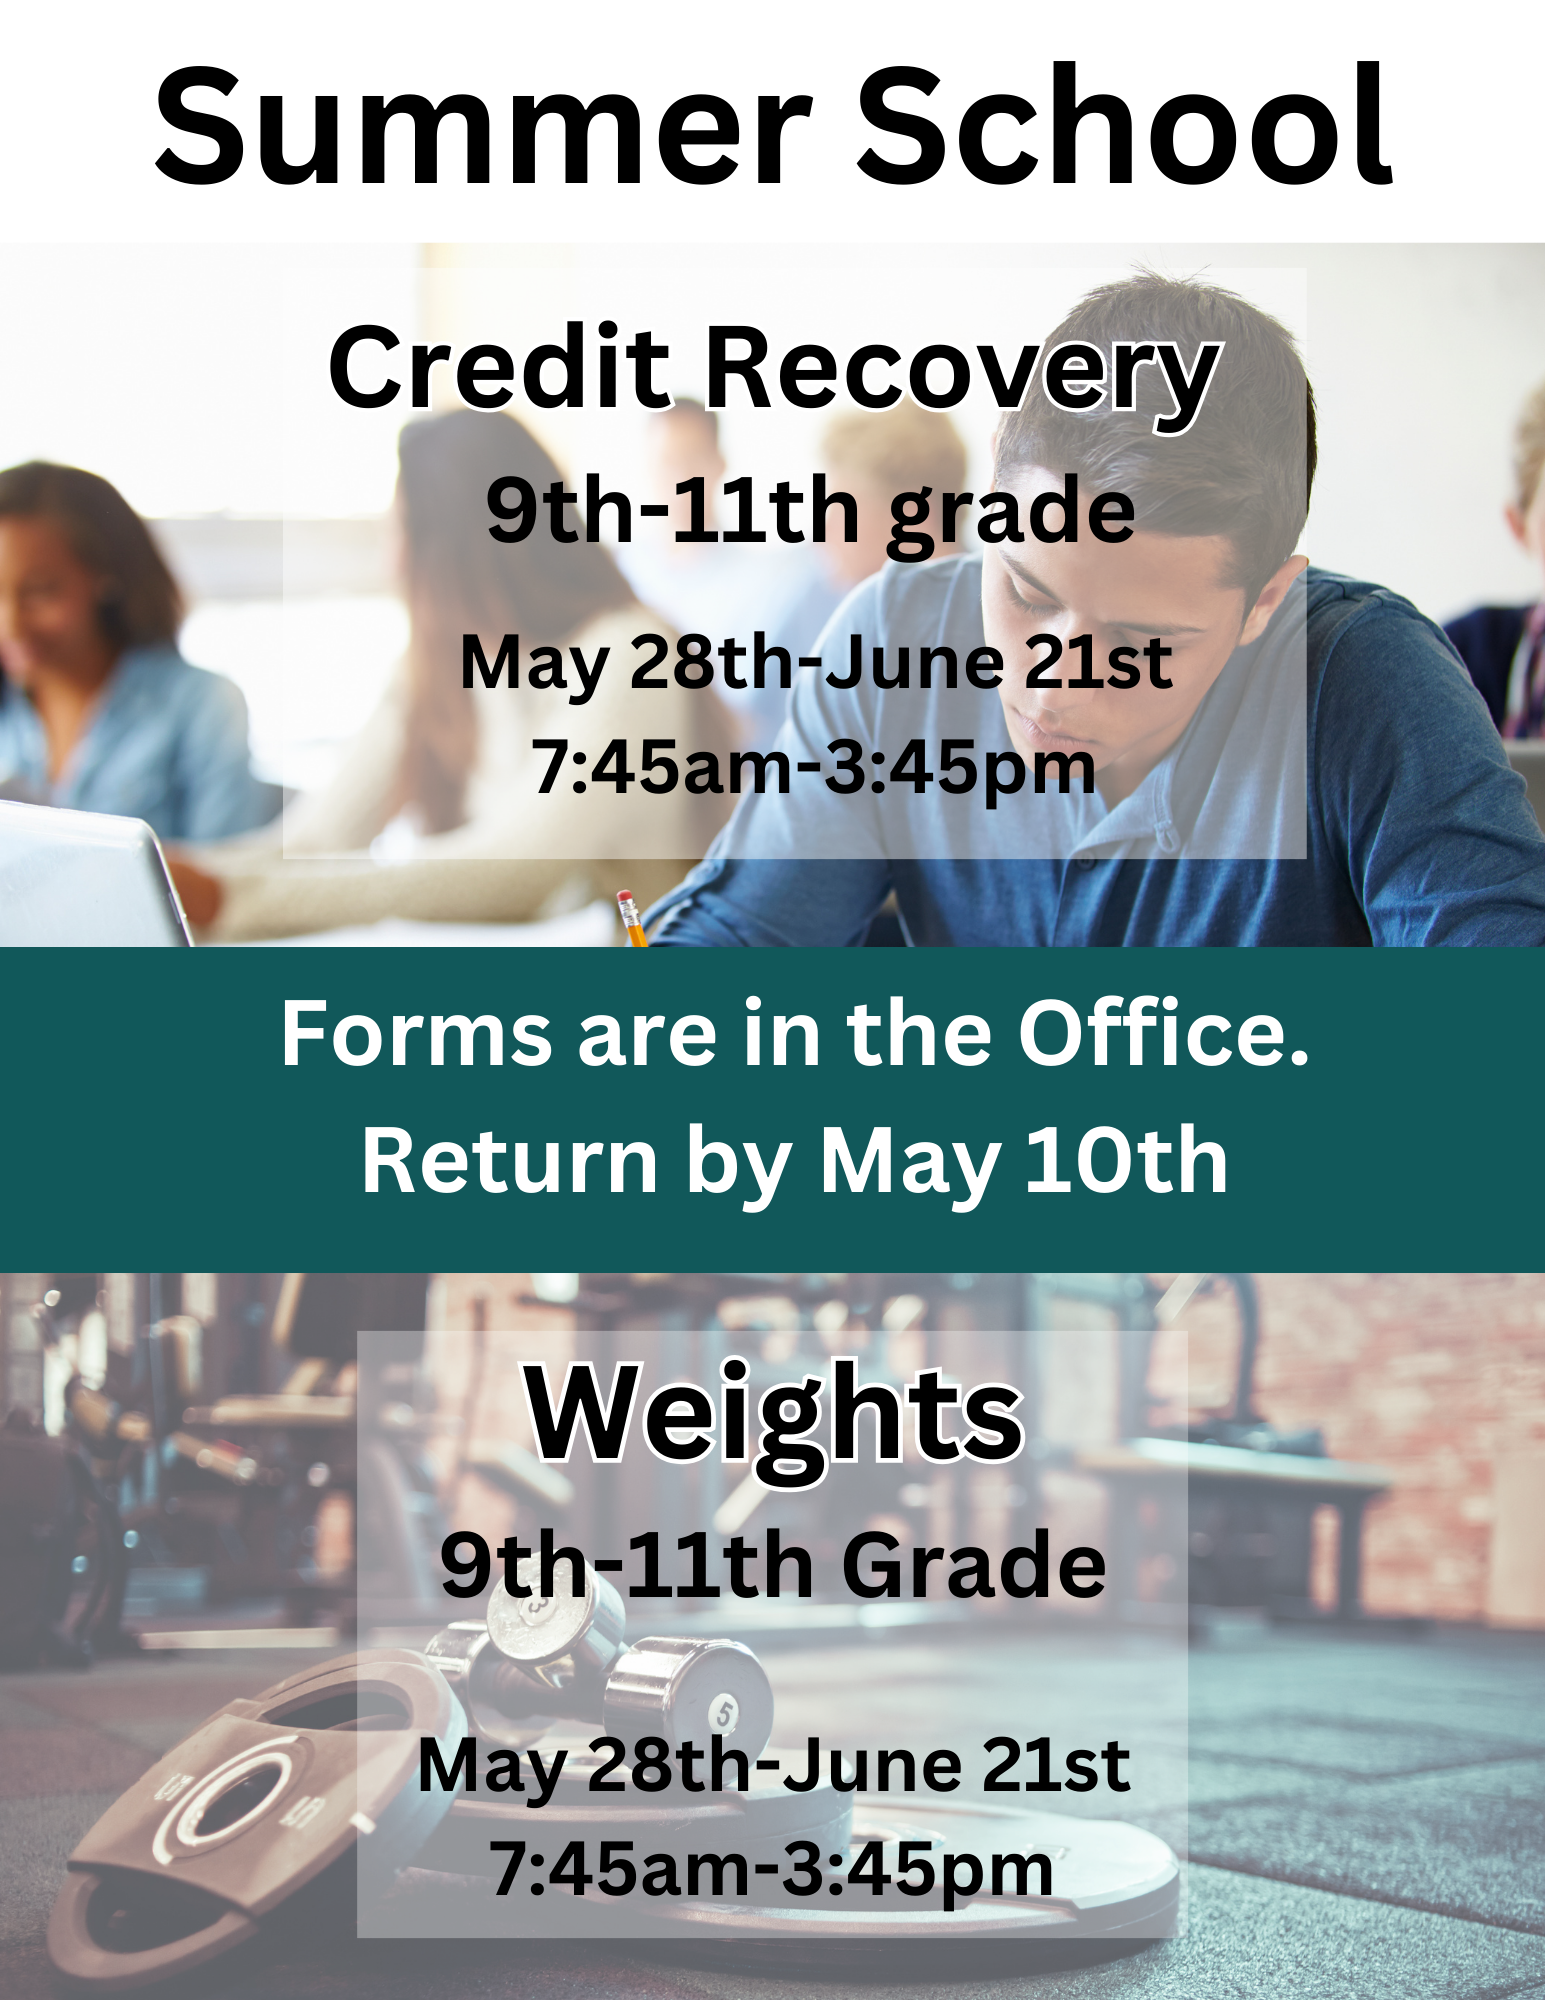 HS Summer School.  Forms are in the Office and should be returned by May 10th.  Credit Recovery or Weights for grades 9th-11th.  May 28th-June 21st.  7:45am-3:45pm